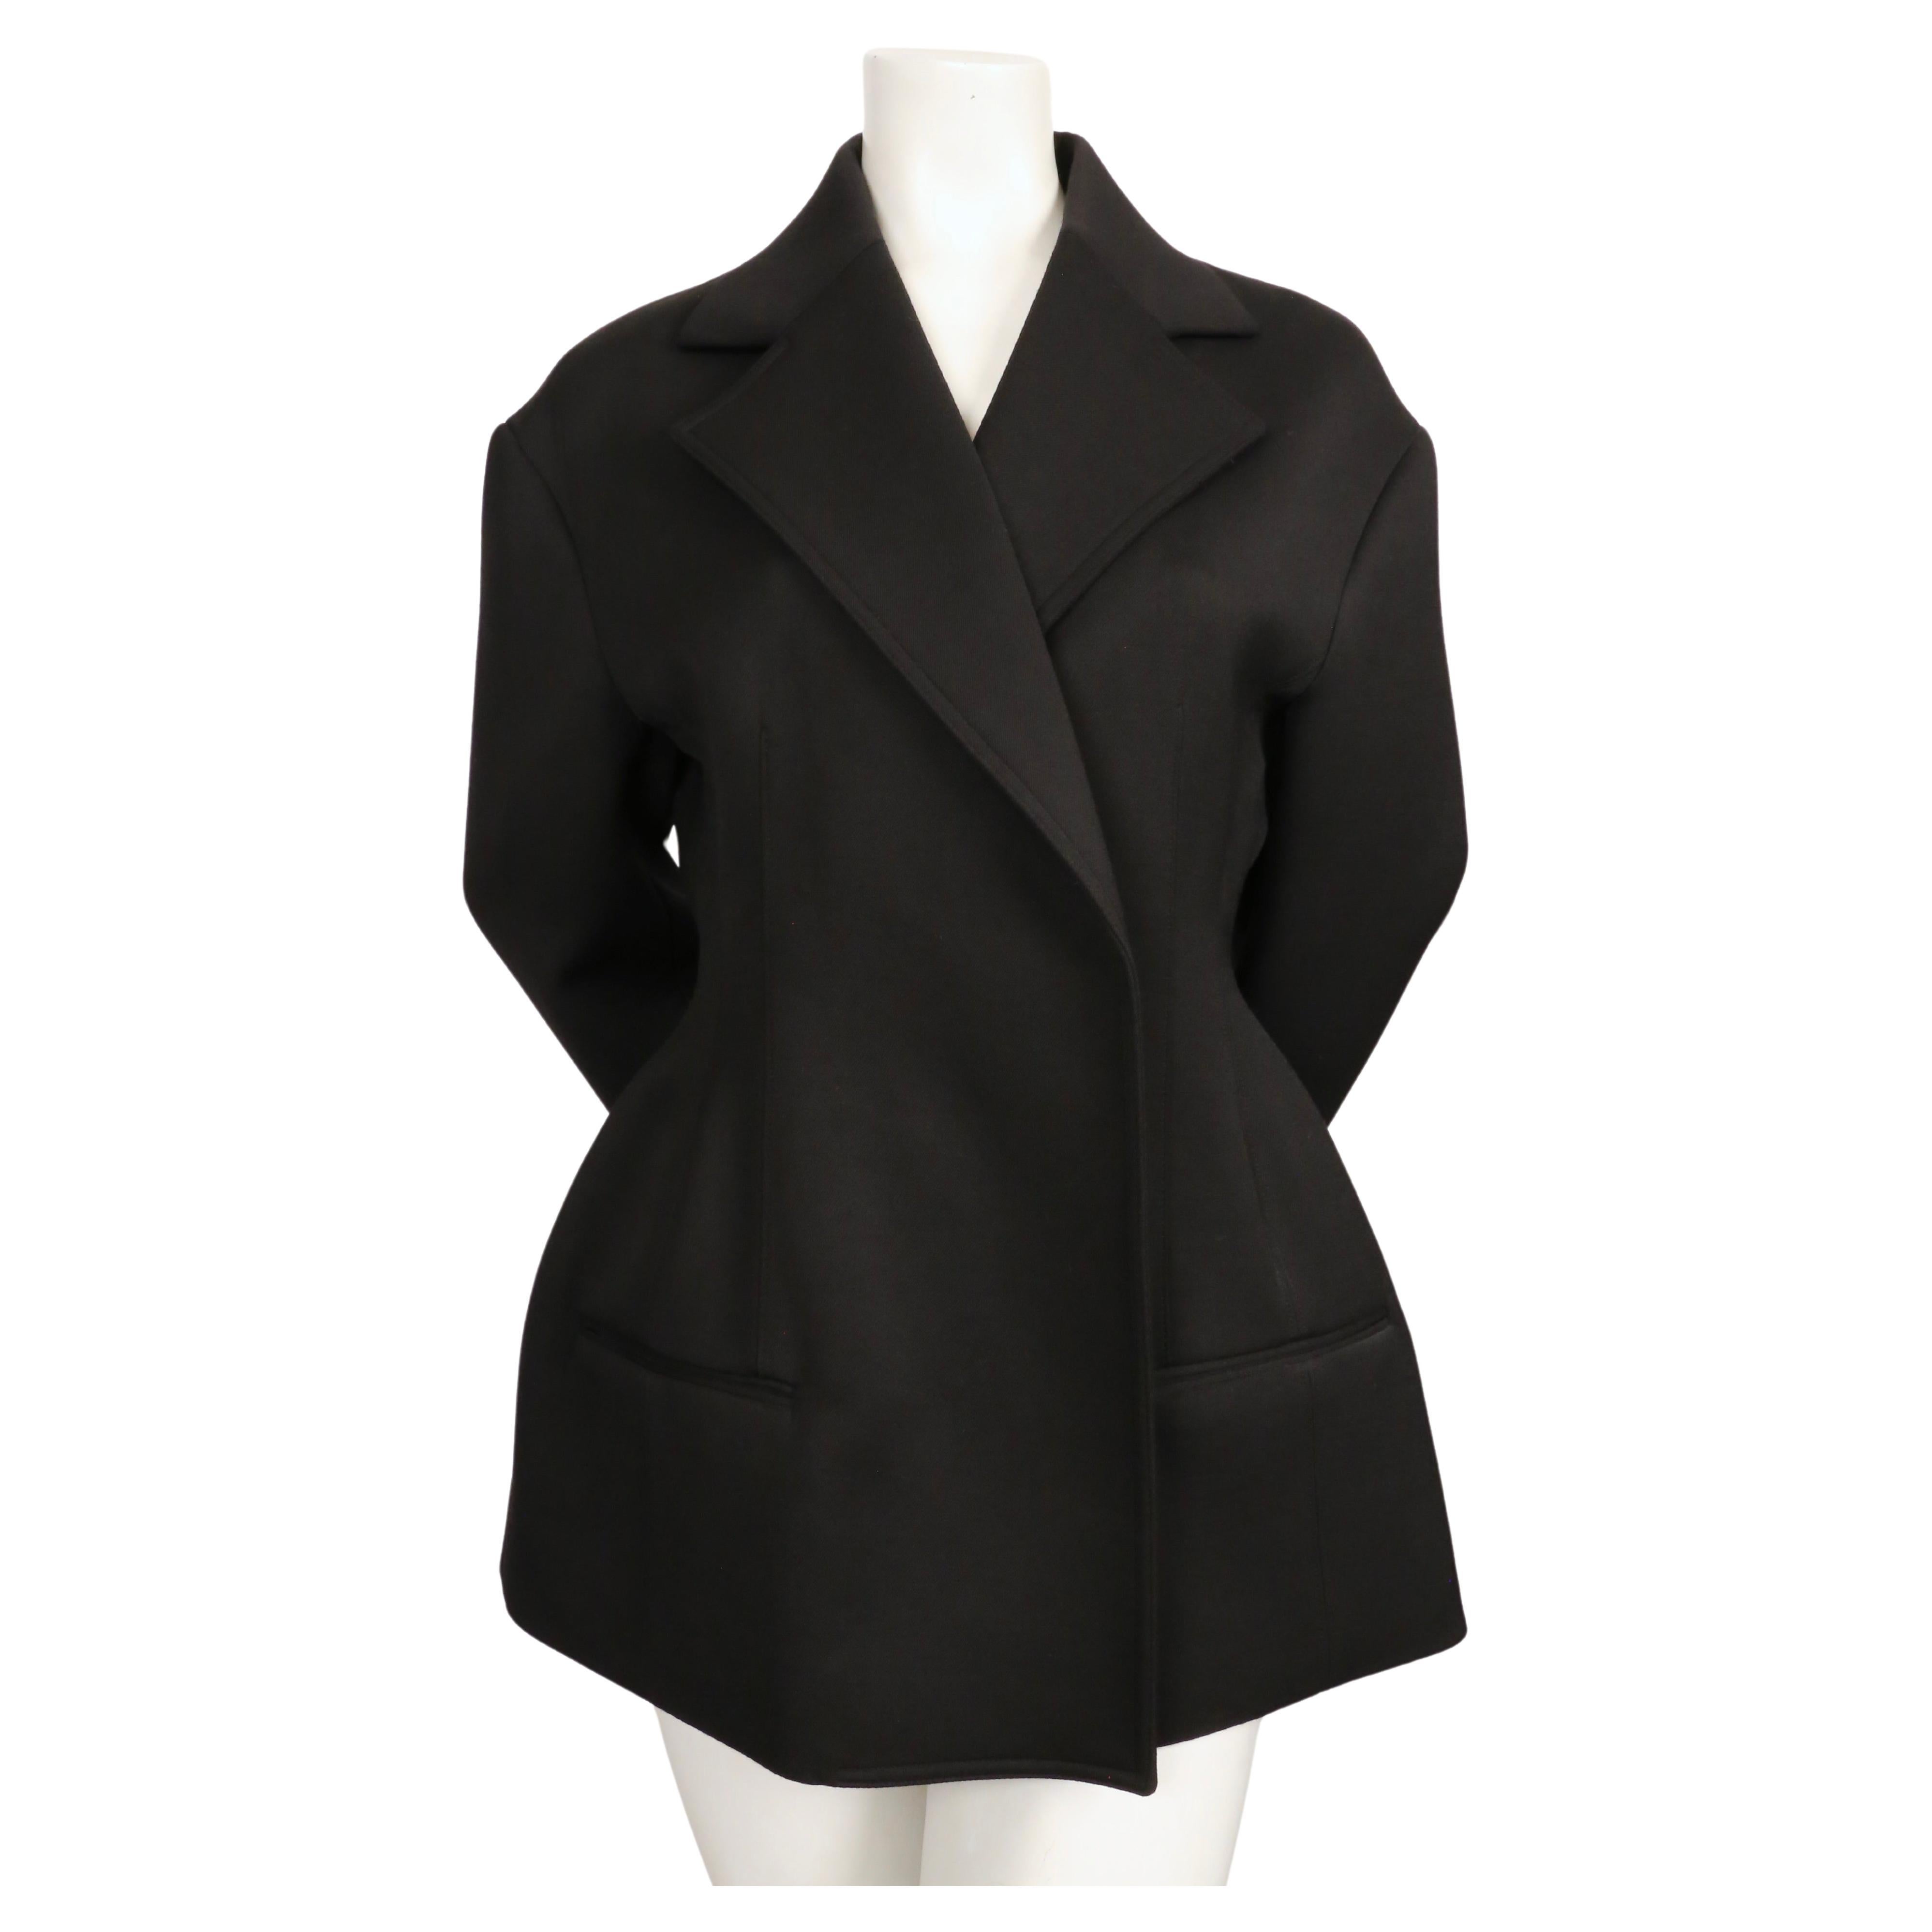 Black hourglass shaped jacket with open closure designed by Phoebe Philo for Celine dating to resort of 2016 as featured in the Resort ad campaign. No size indicated however this is probably a French 38 or possibly a 40. Approximate measurements